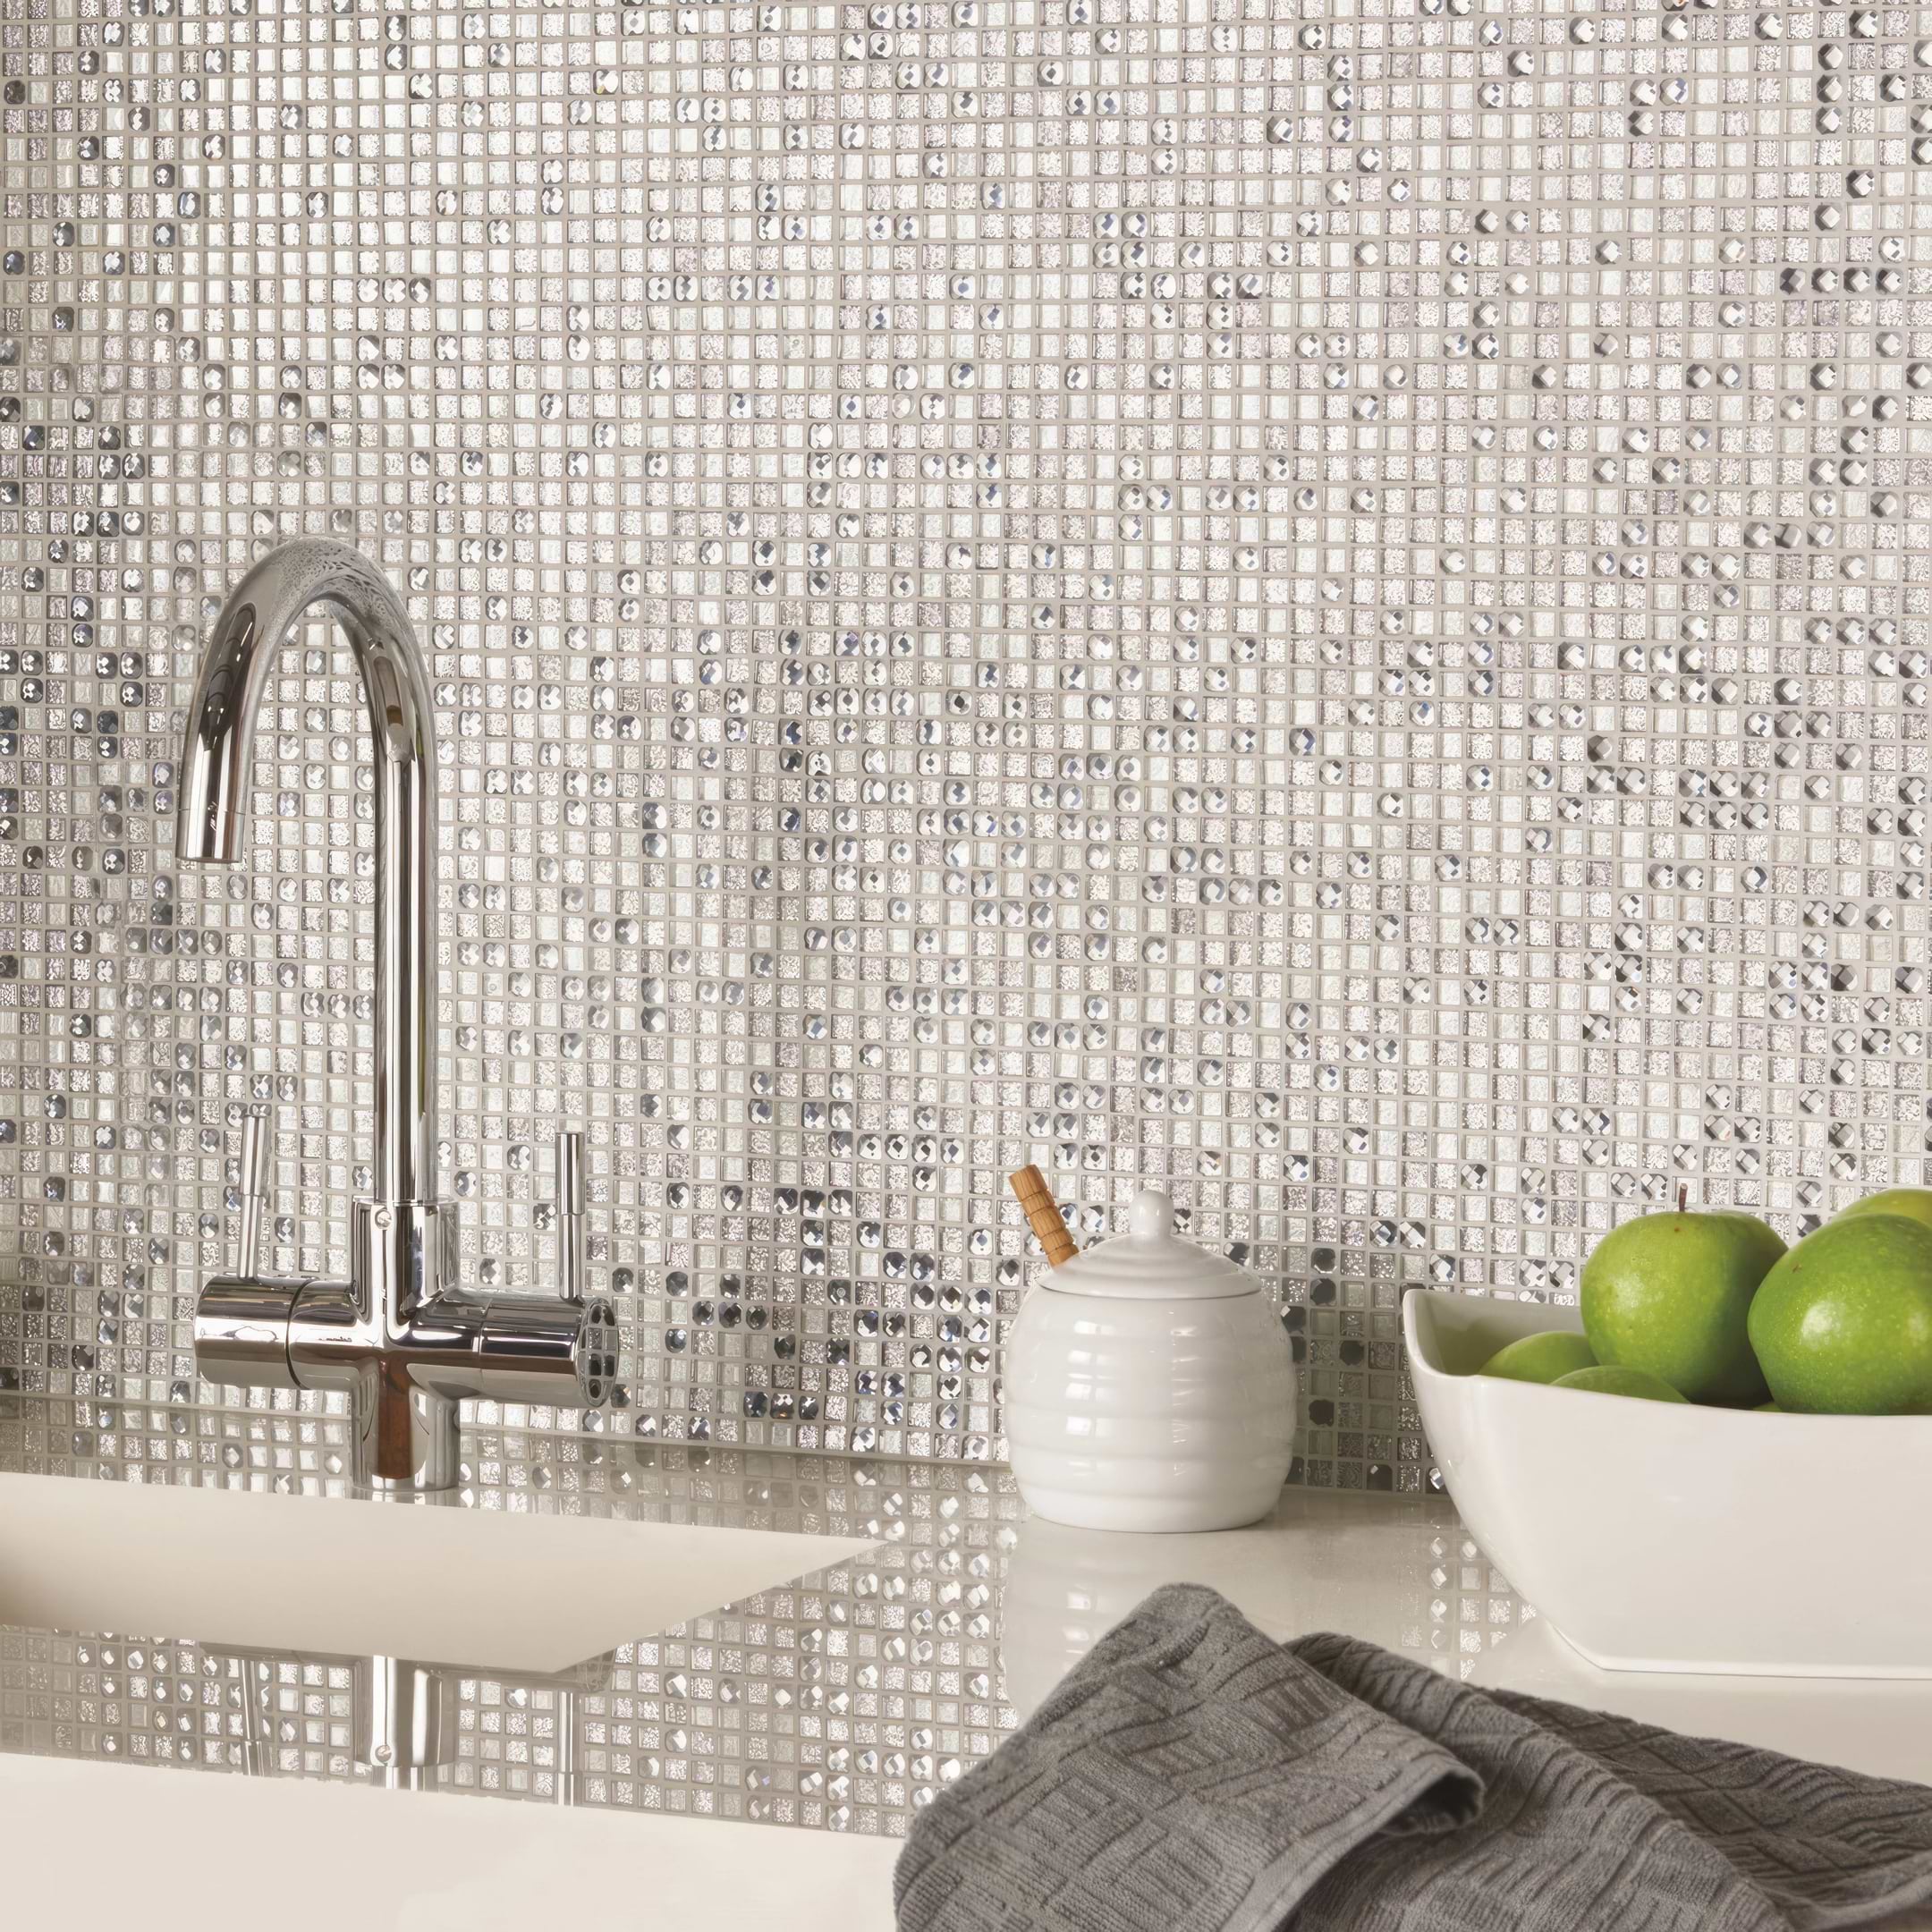 Agra Glass and Gem Mosaic - Hyperion Tiles